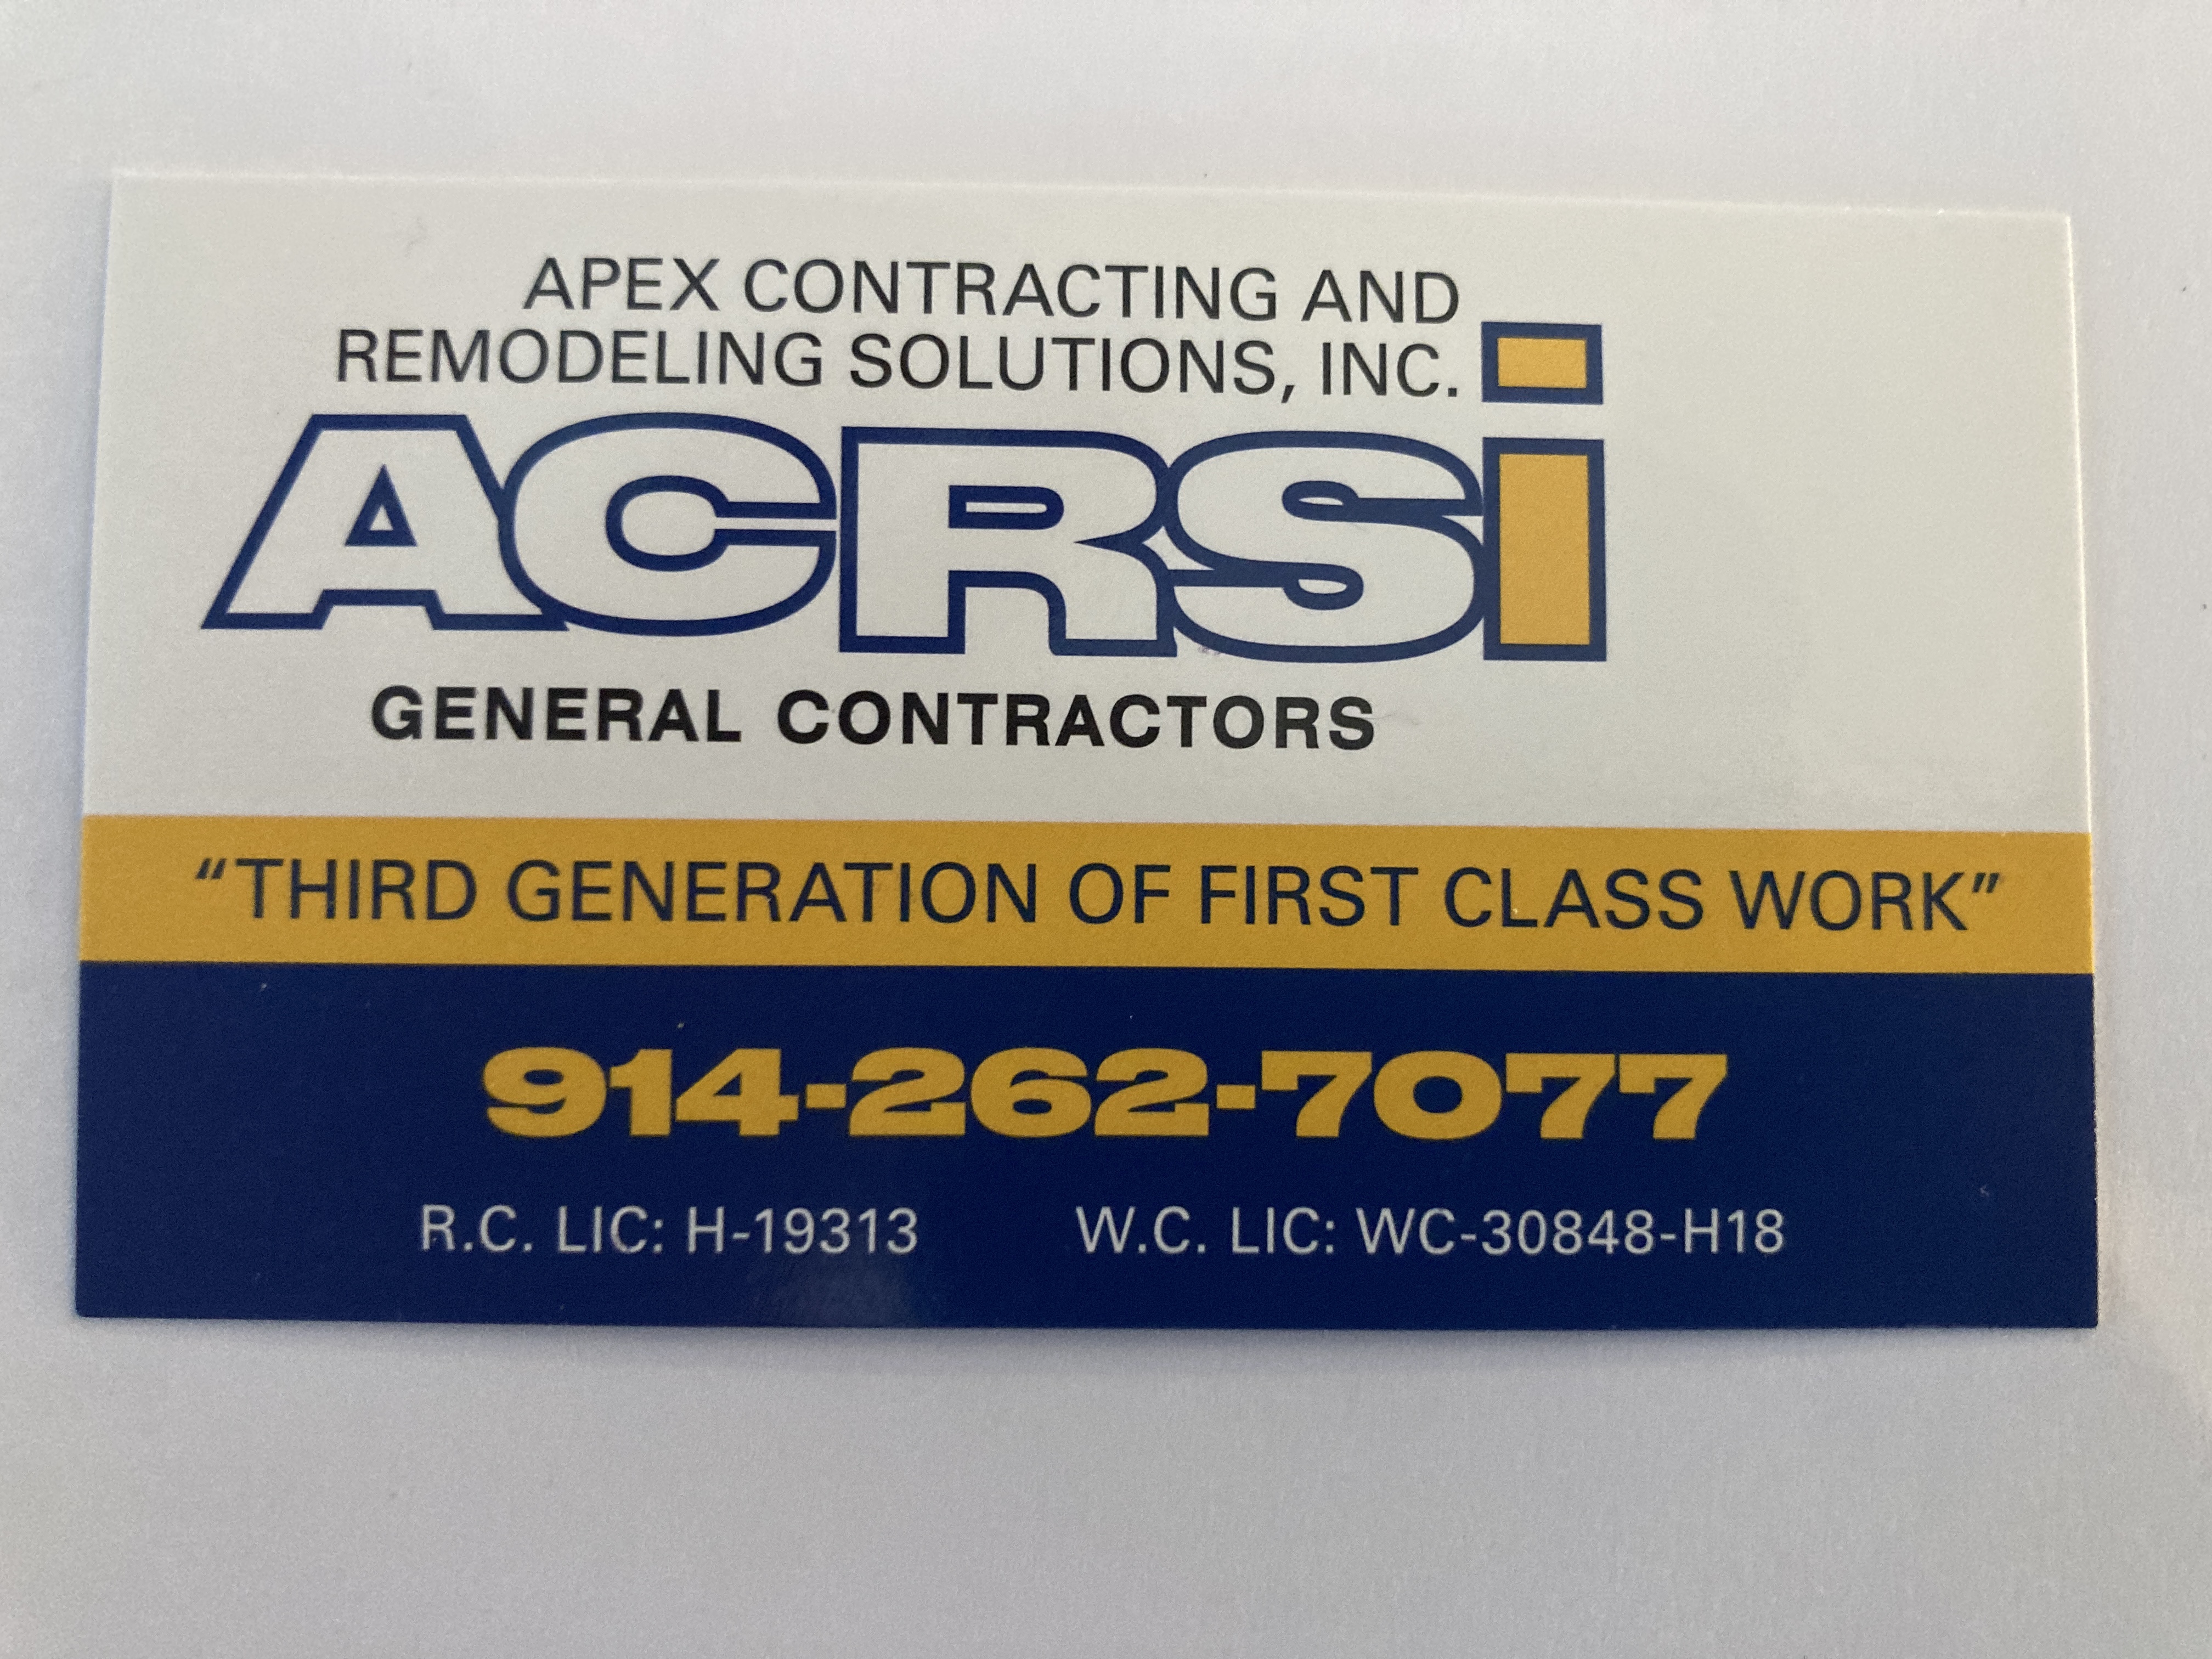 Apex Contracting and Remodeling Solutions, Inc. Logo